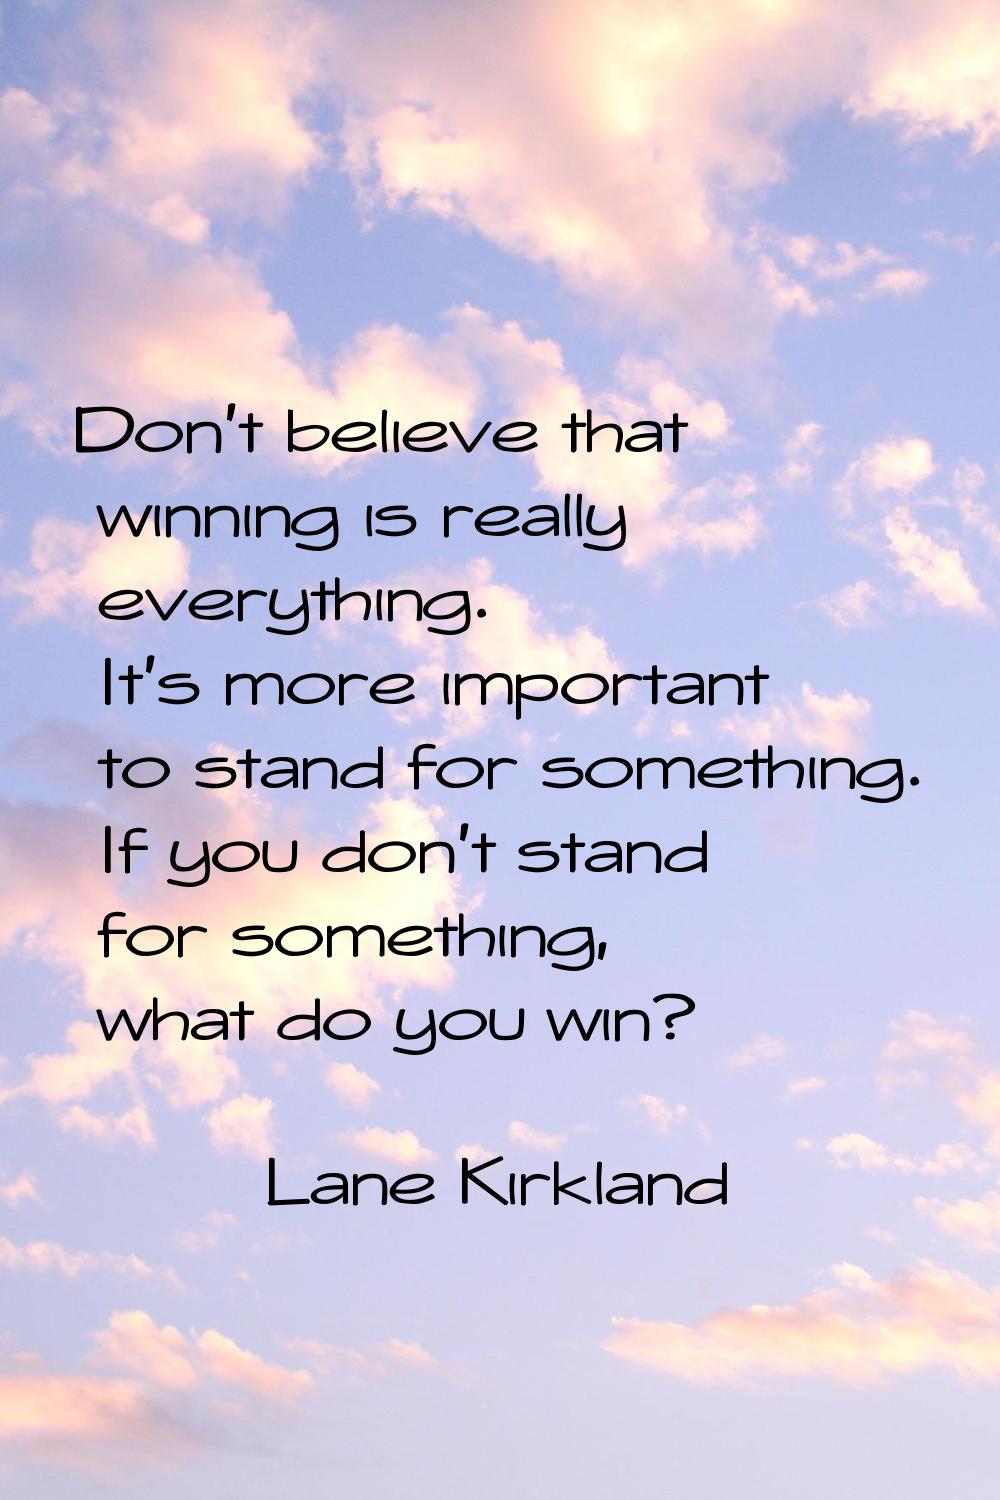 Don't believe that winning is really everything. It's more important to stand for something. If you